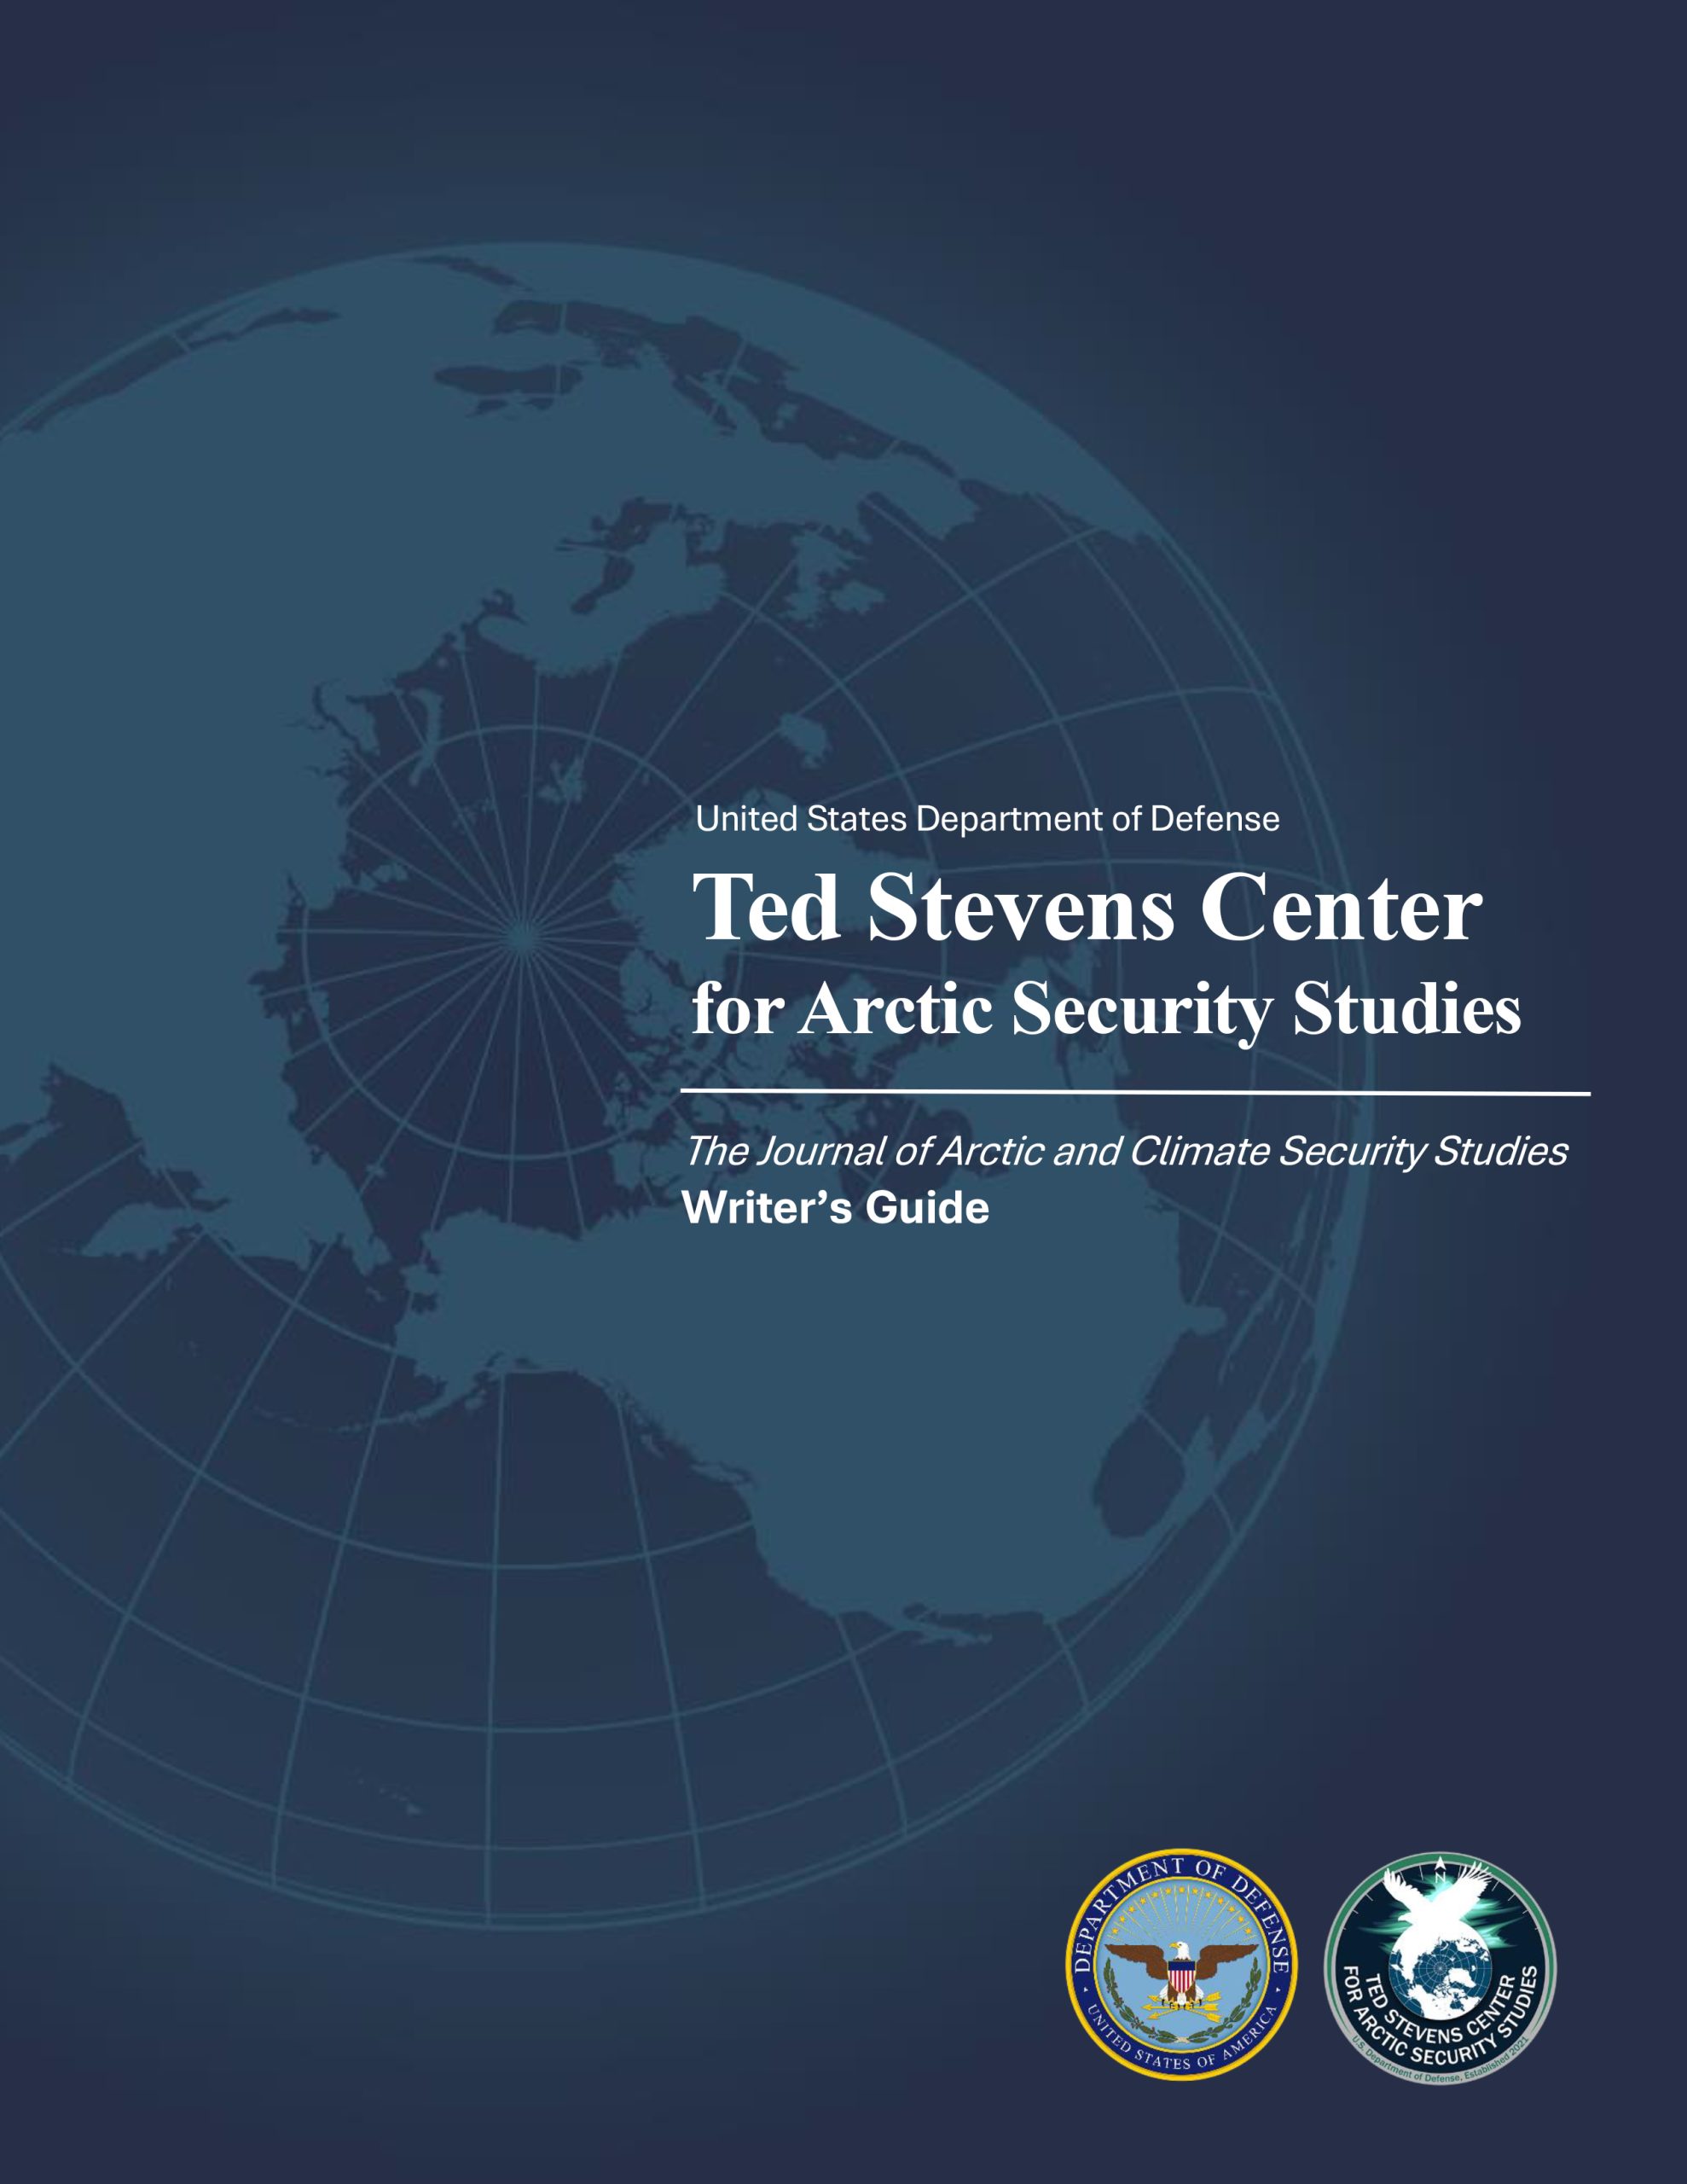 The cover image for the Journal of Arctic and Climate Security Studies (JACSS) writer's guide.